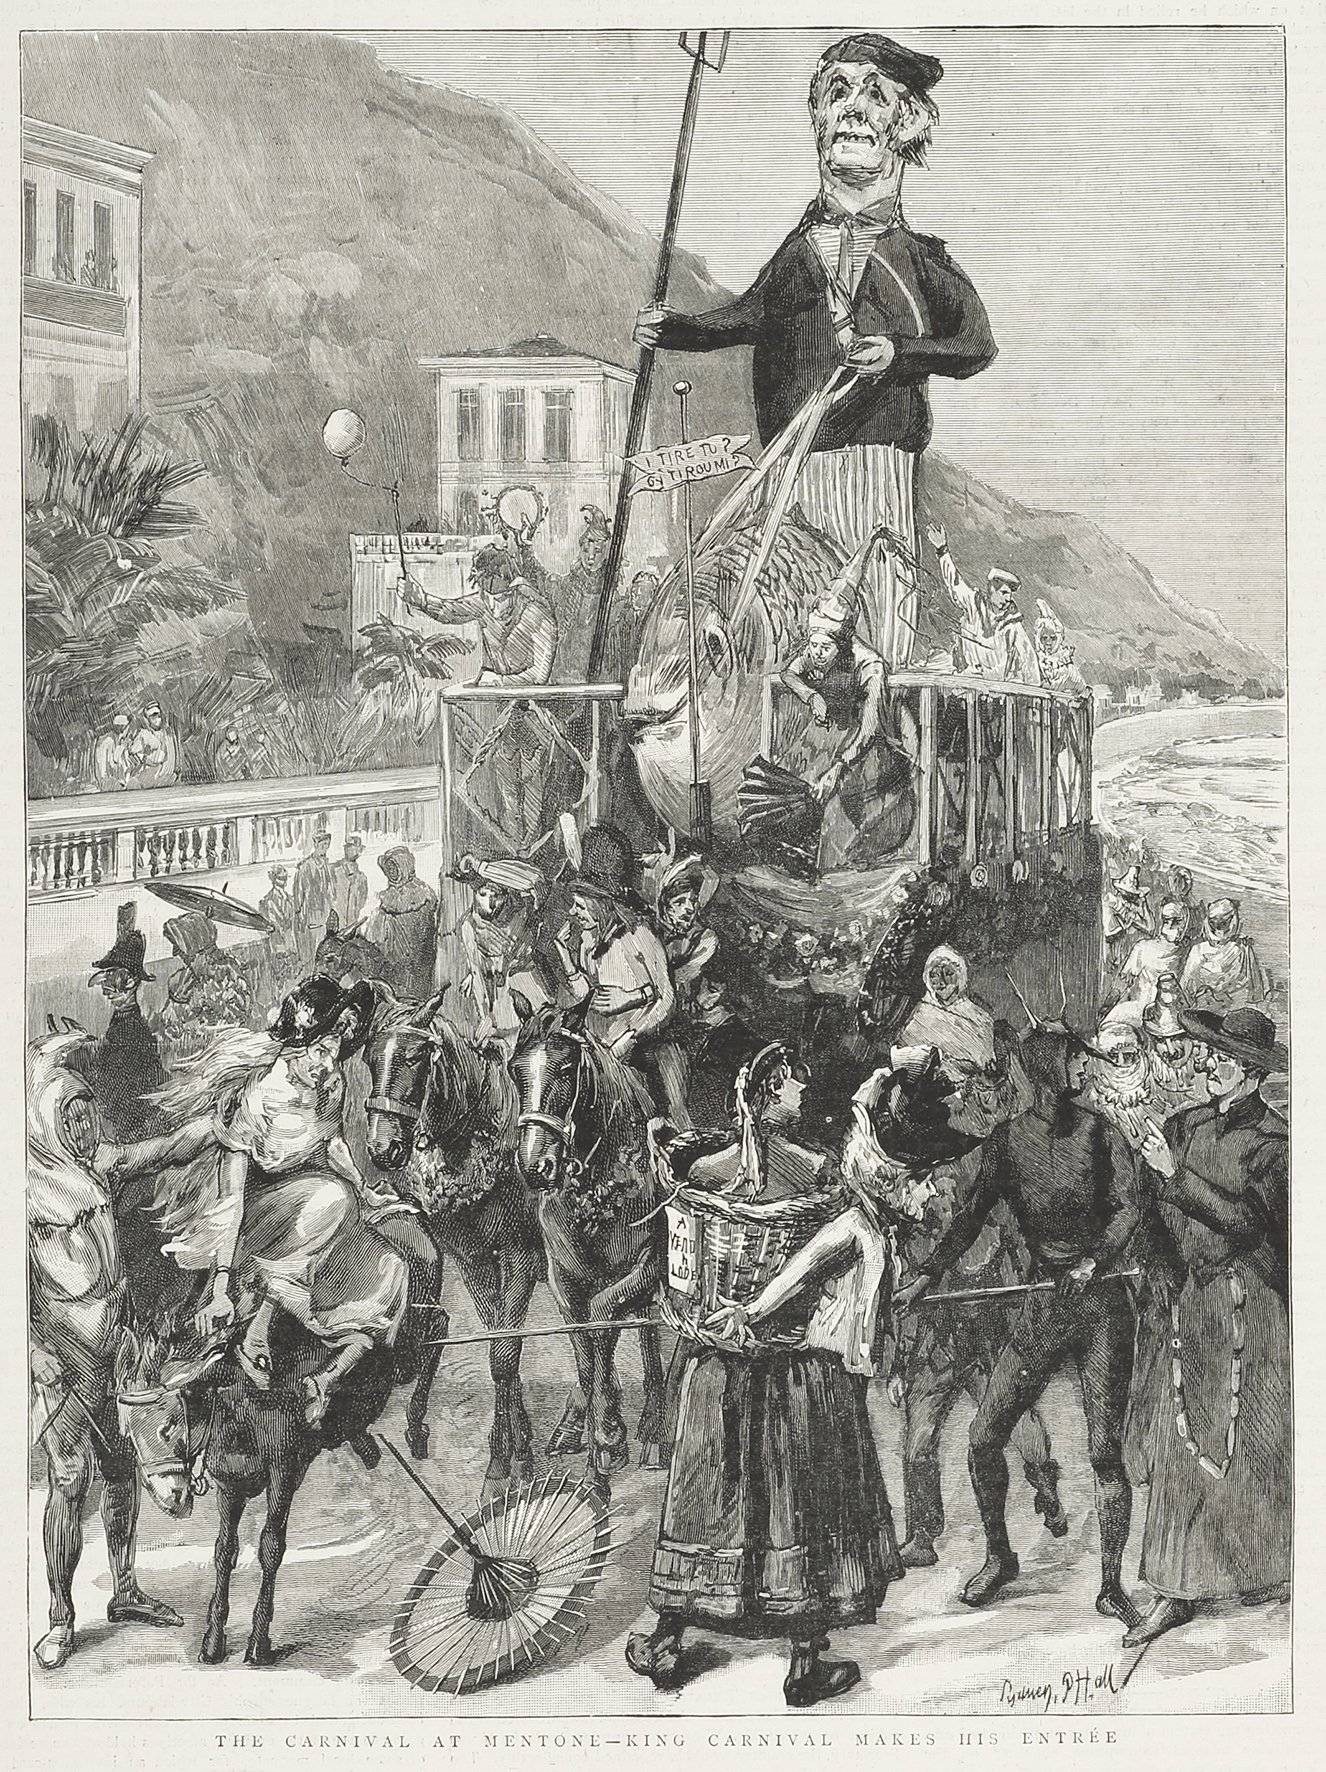 The Carnival at Mentone-King Carnival makes his entree - Antique Print from 1890